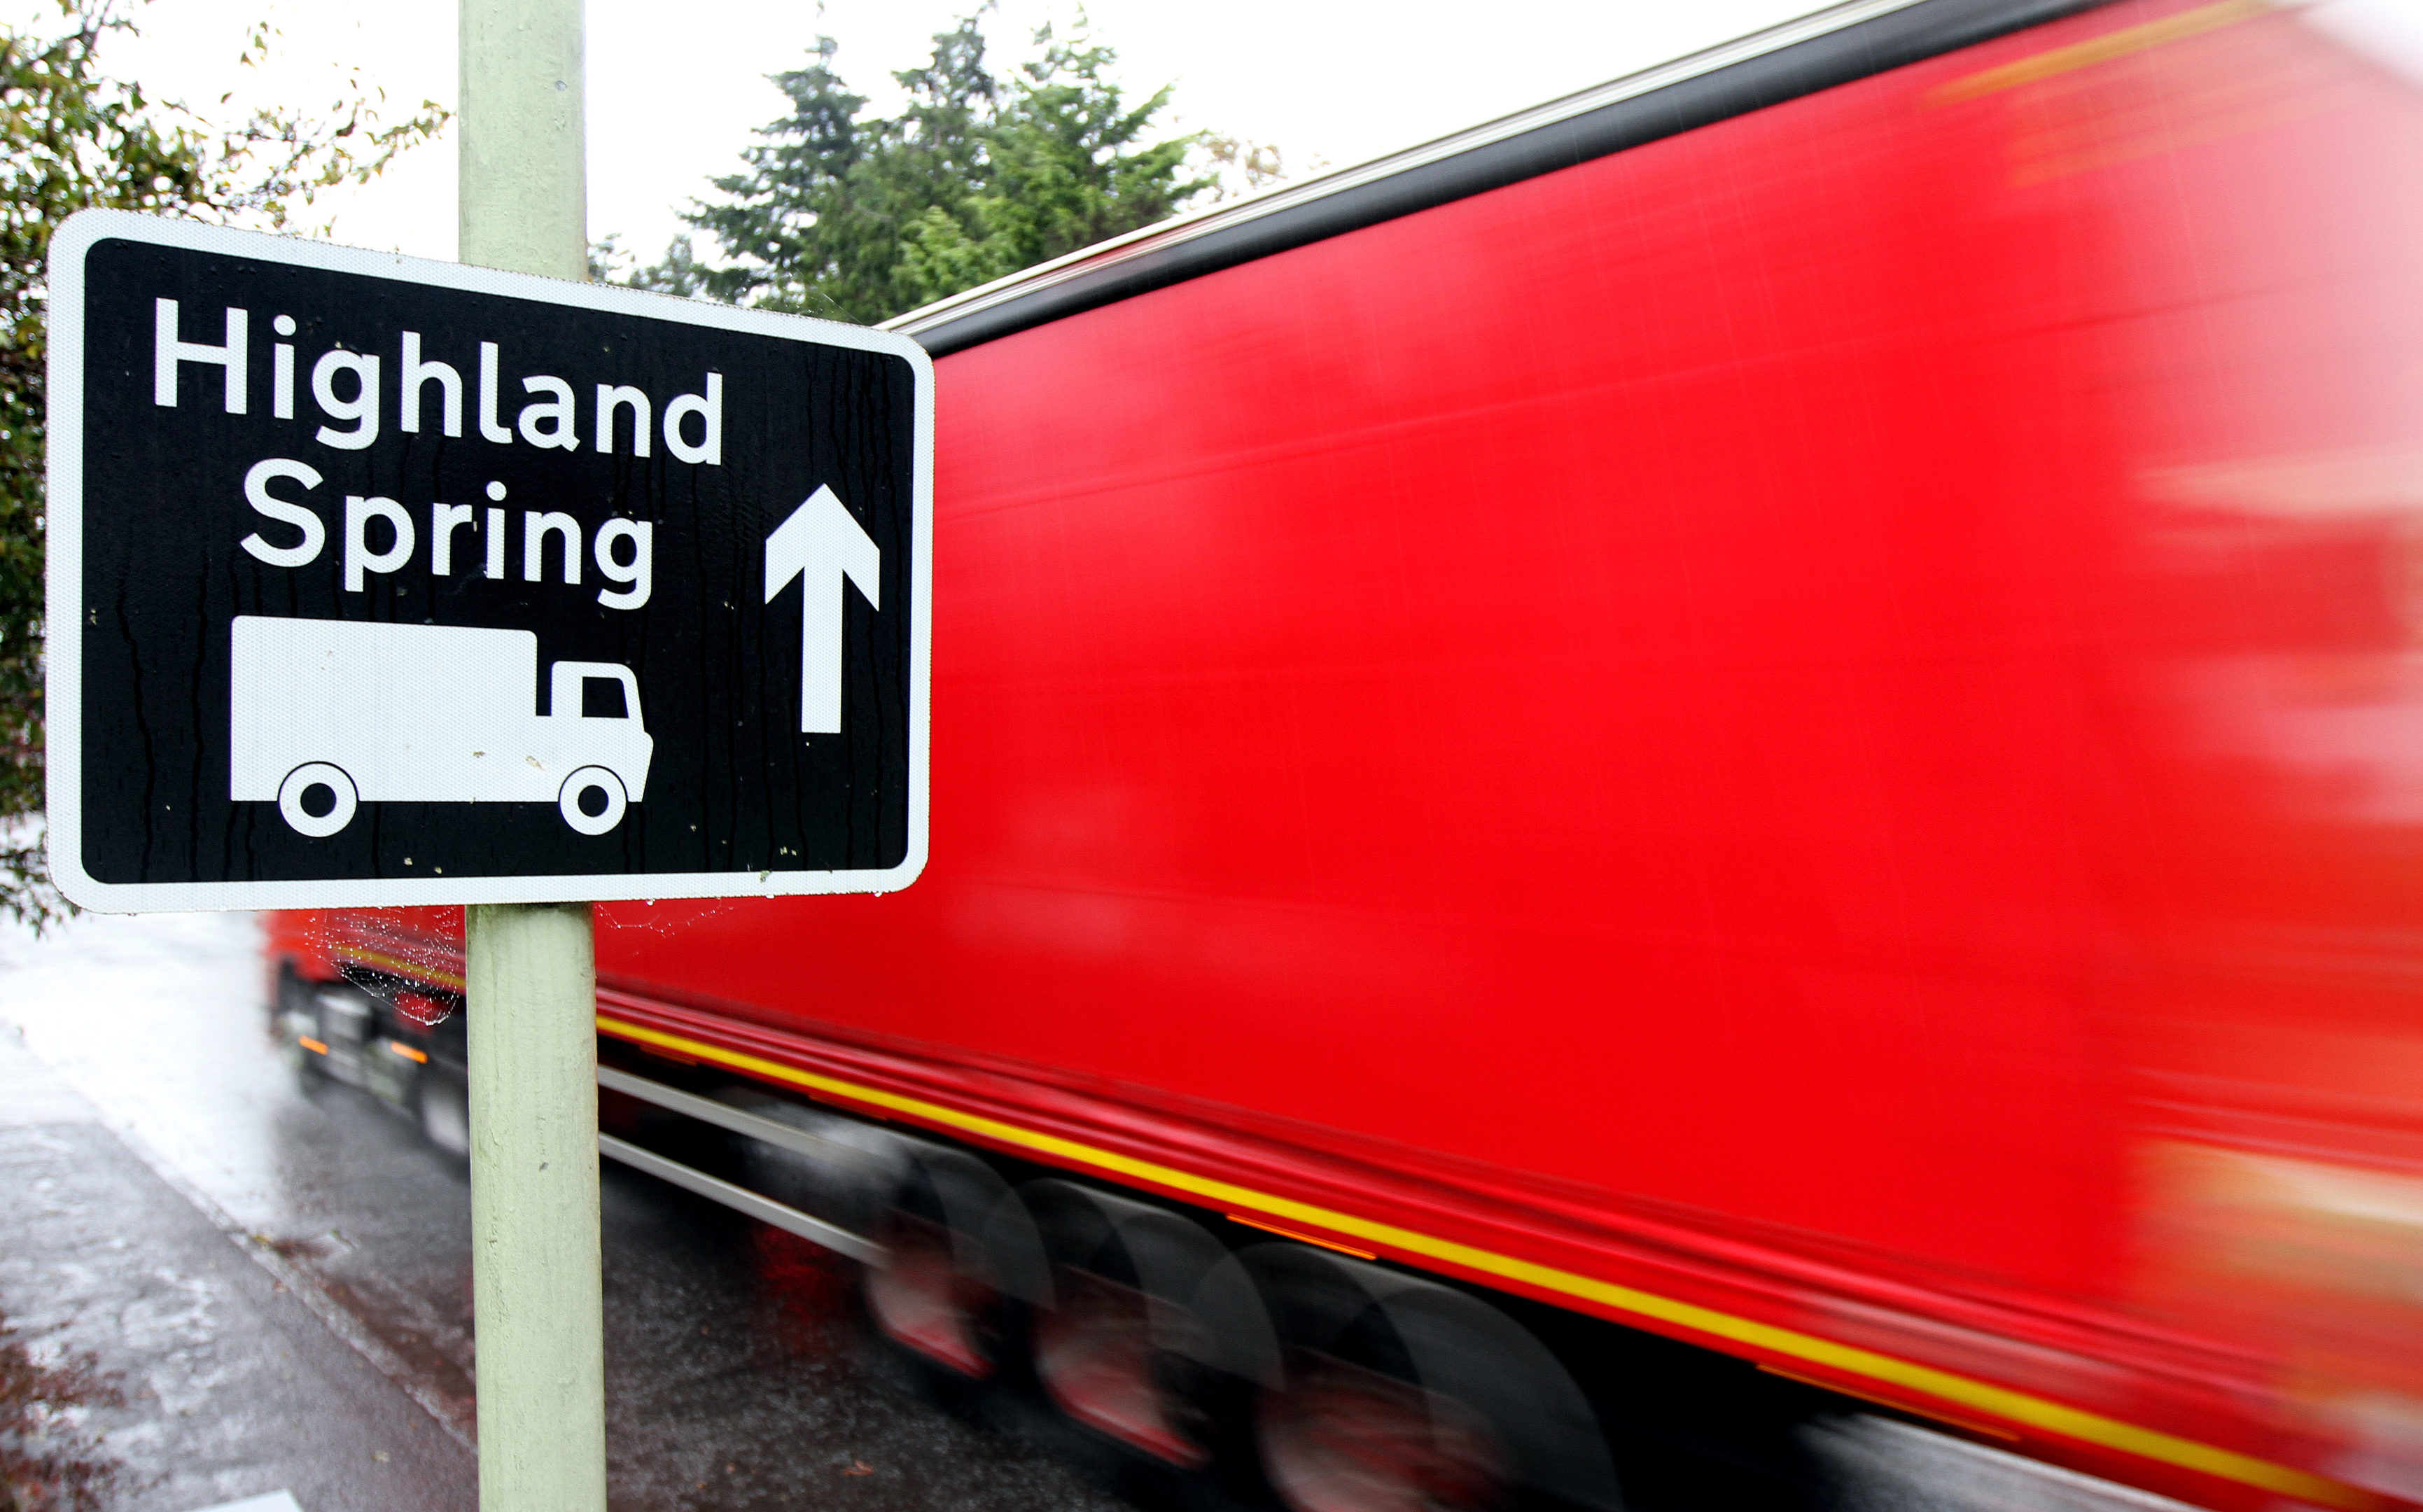 The plans will hope to bring the use of HGVs down.